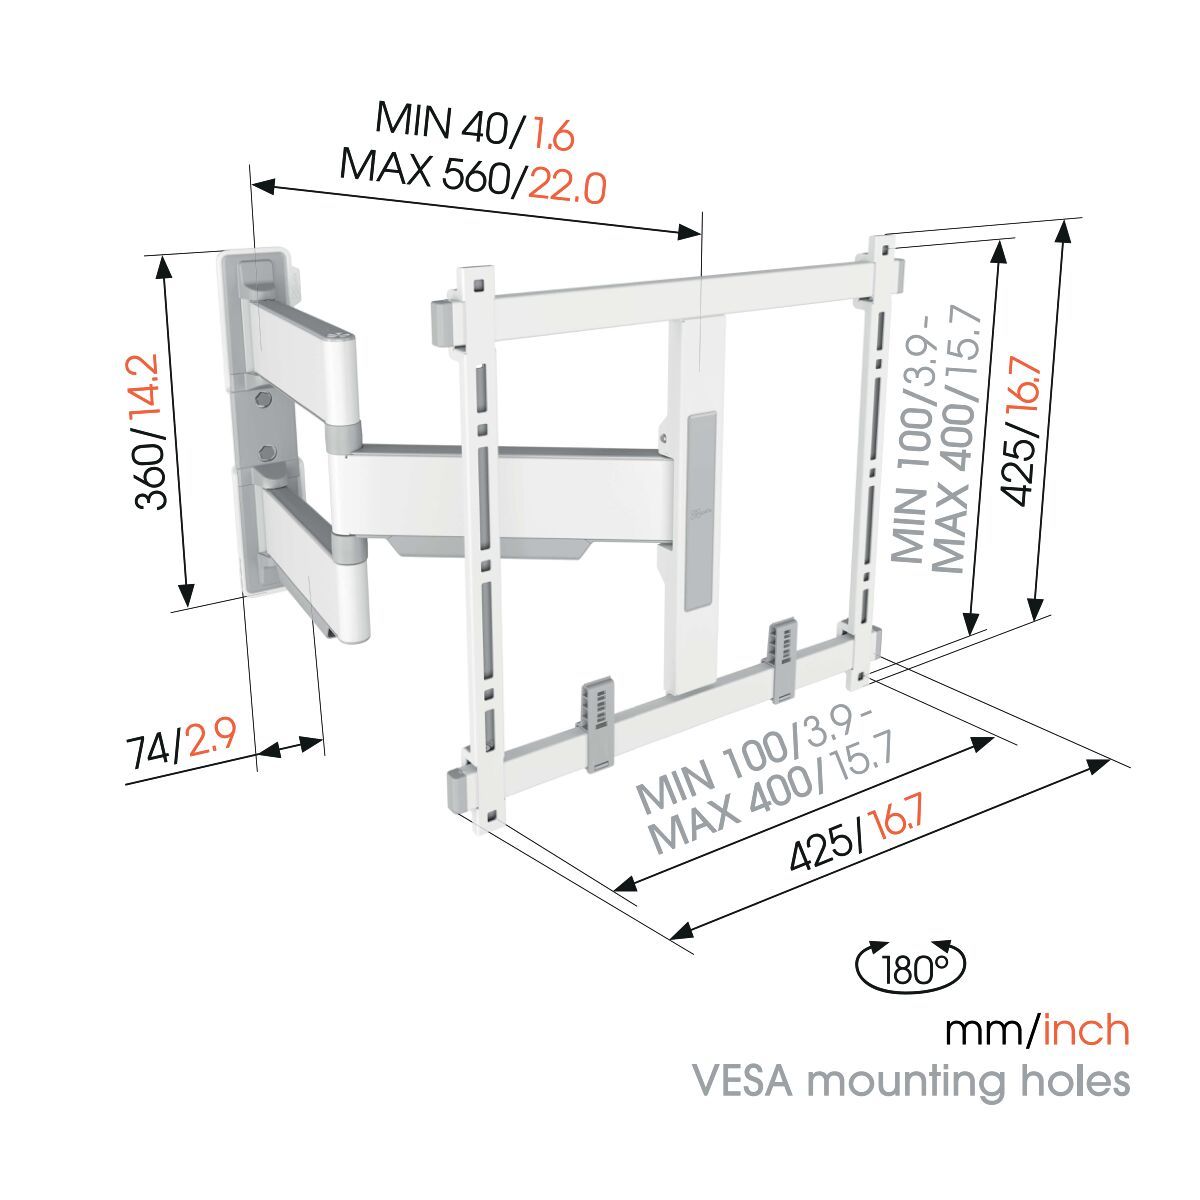 Vogel's TVM 5445 Full-Motion TV Wall Mount (white) - Suitable for 32 up to 65 inch TVs - Full motion (up to 180°) swivel - Dimensions